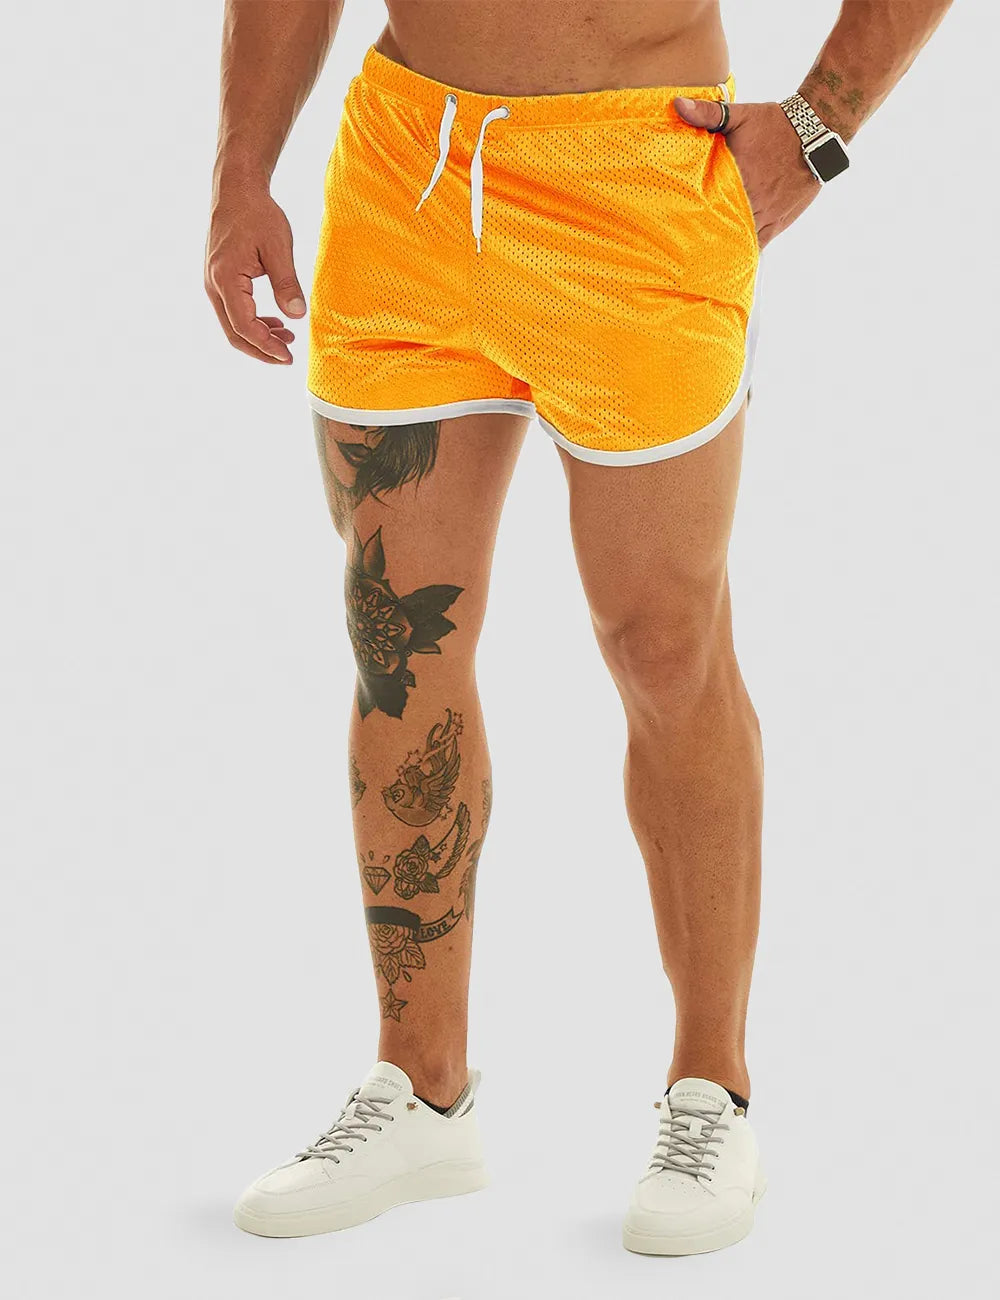 OUBER-MeshSportShorts-Yellow_1_91f8be64-13bd-4002-9aa1-63dee7dfab7a.webp